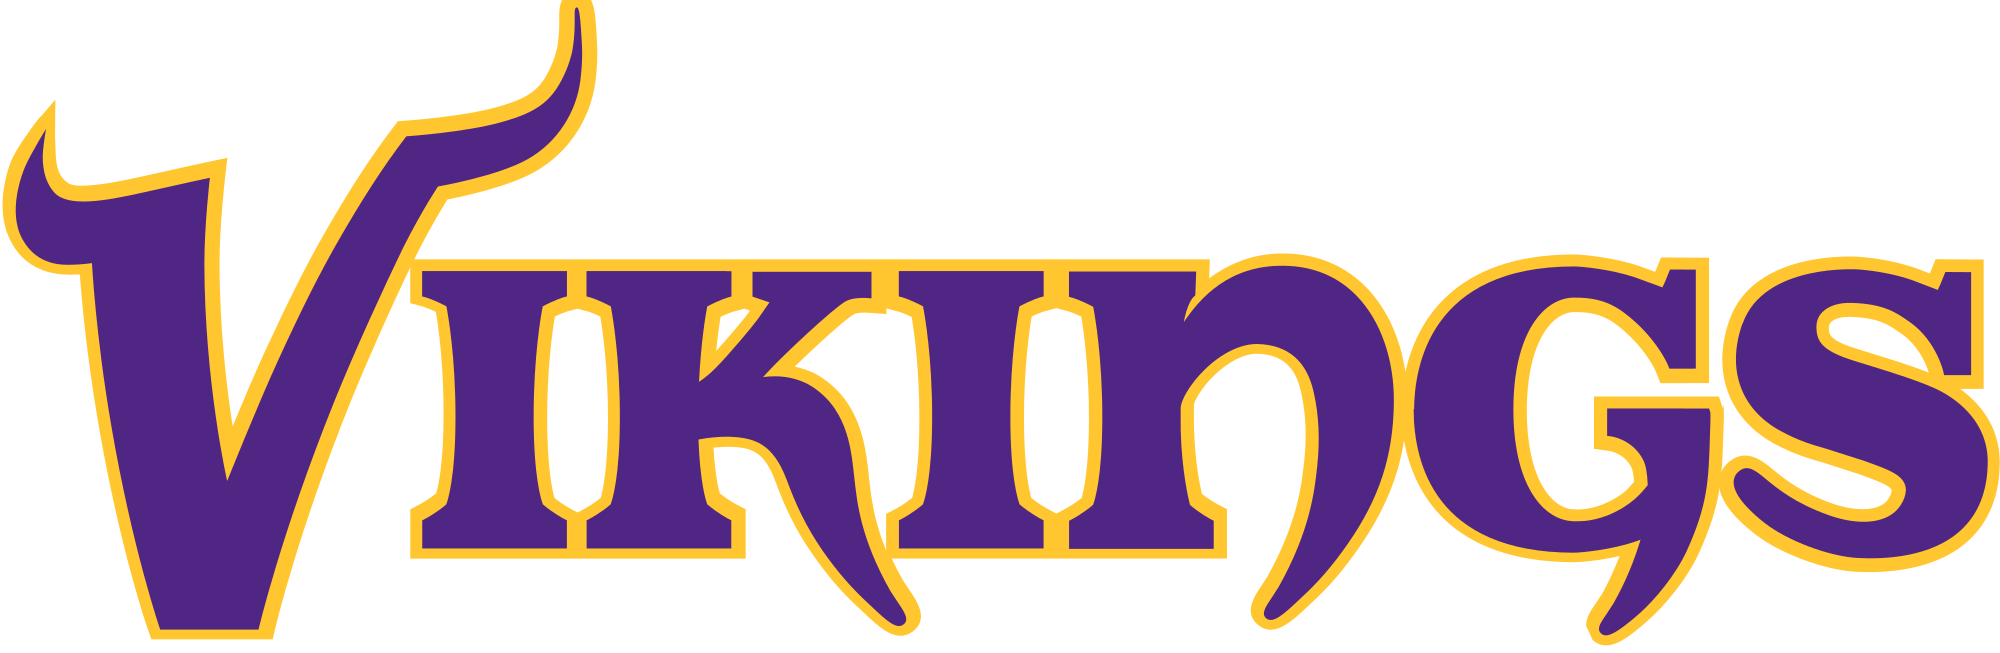 Vikings Logo Png Image With Transparent Background To - vrogue.co